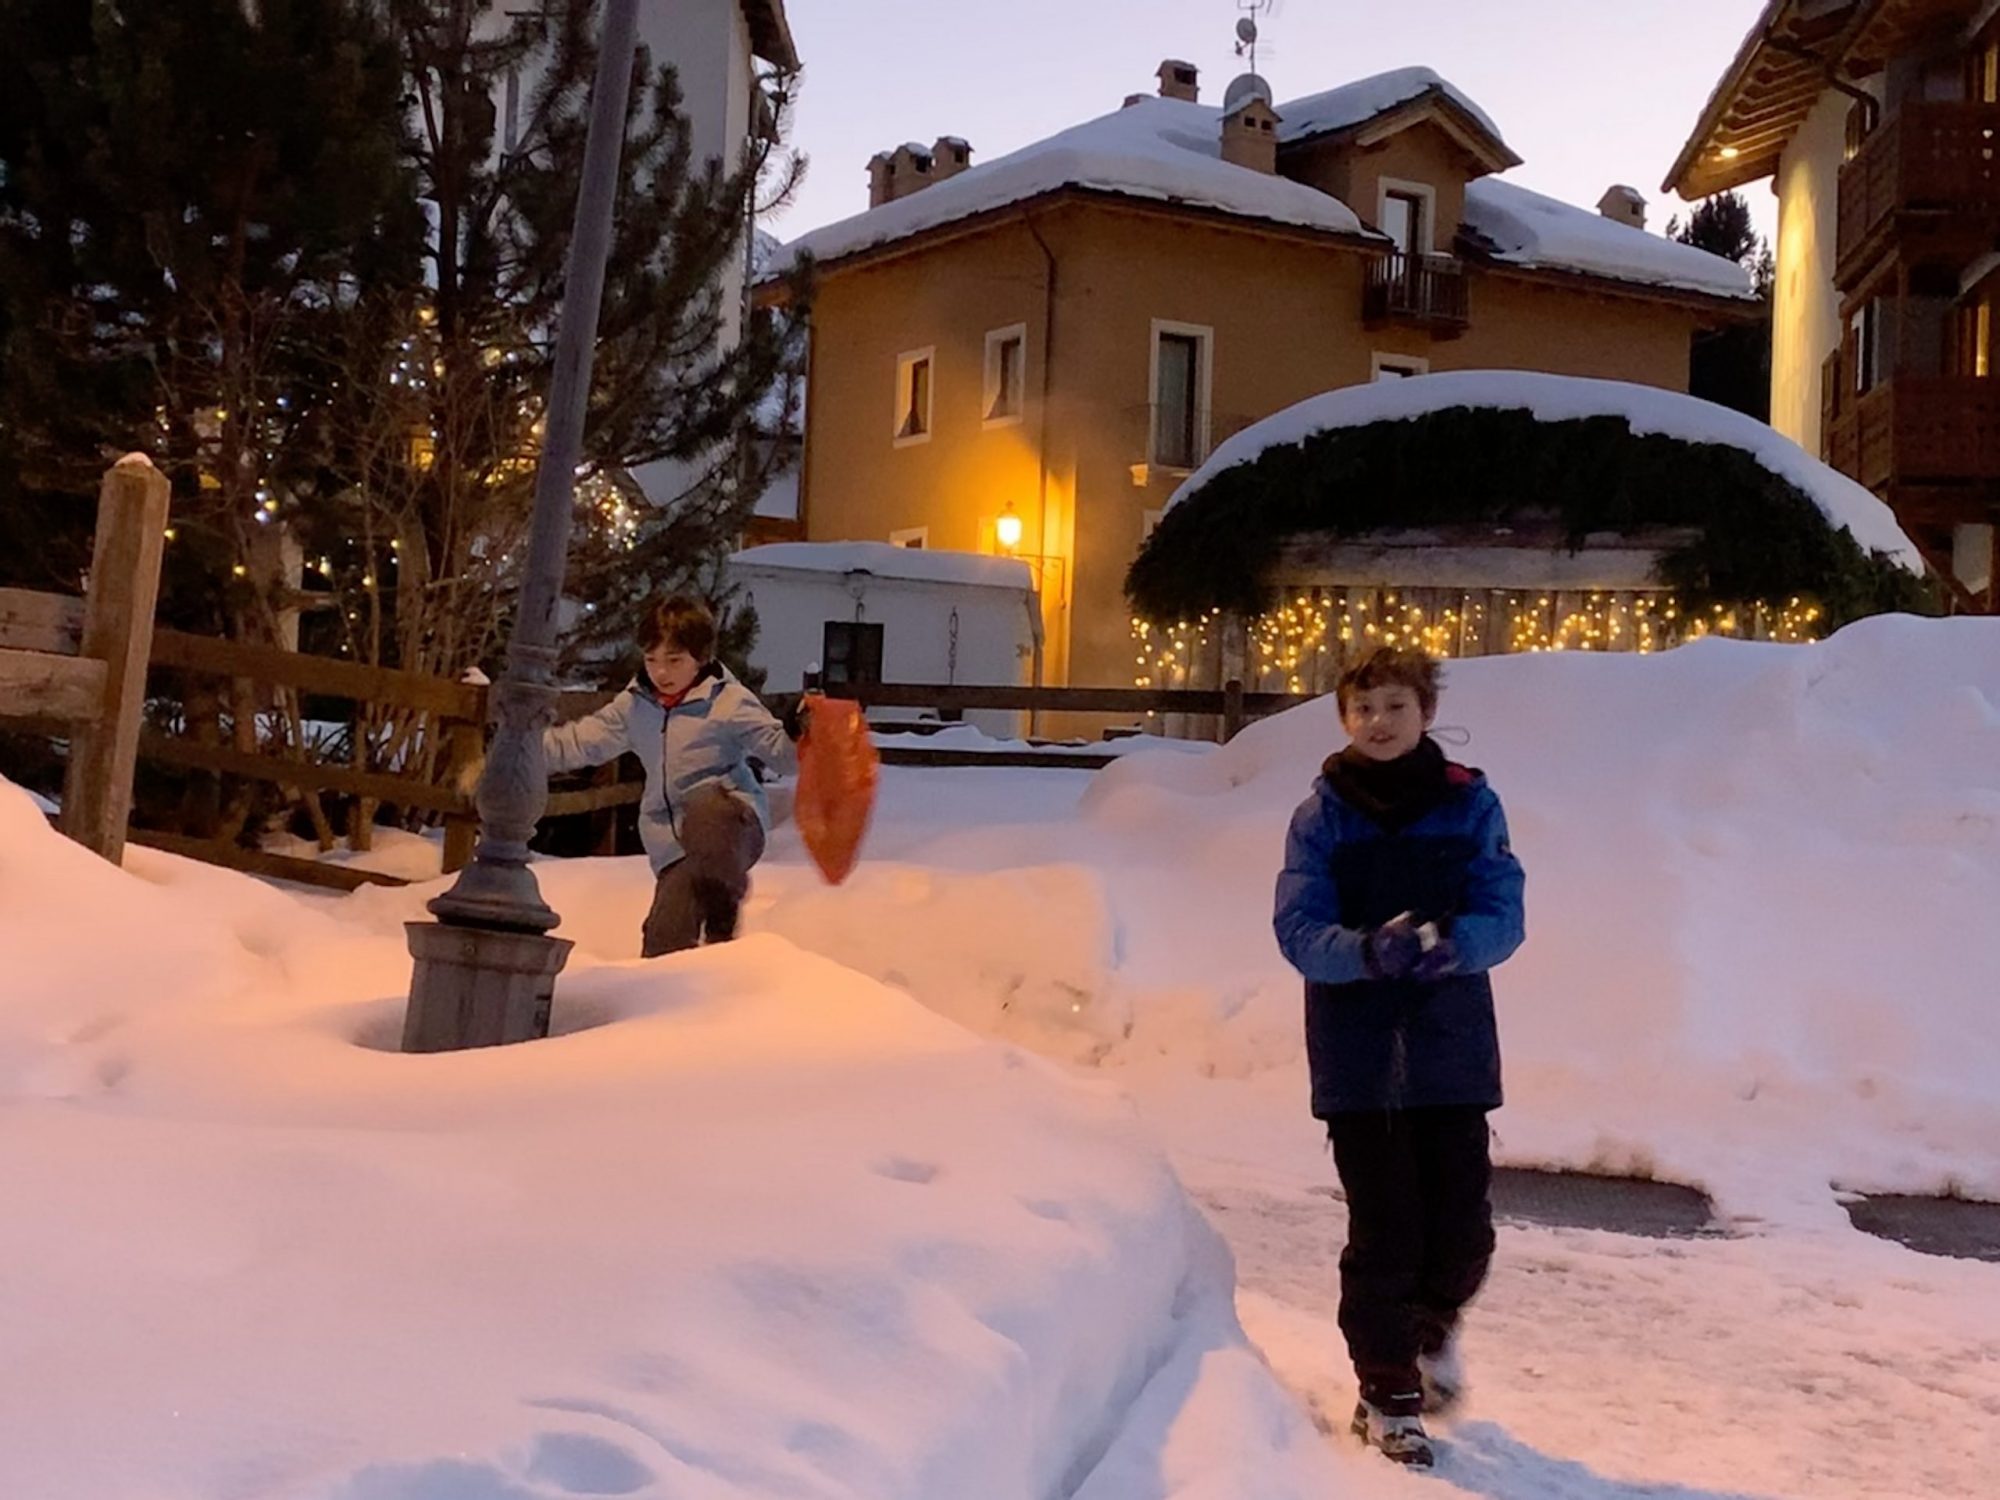 They always managed to get deep in snow. Our Christmas holidays in the mountains with the kids and our dog! Courmayeur, Aosta.